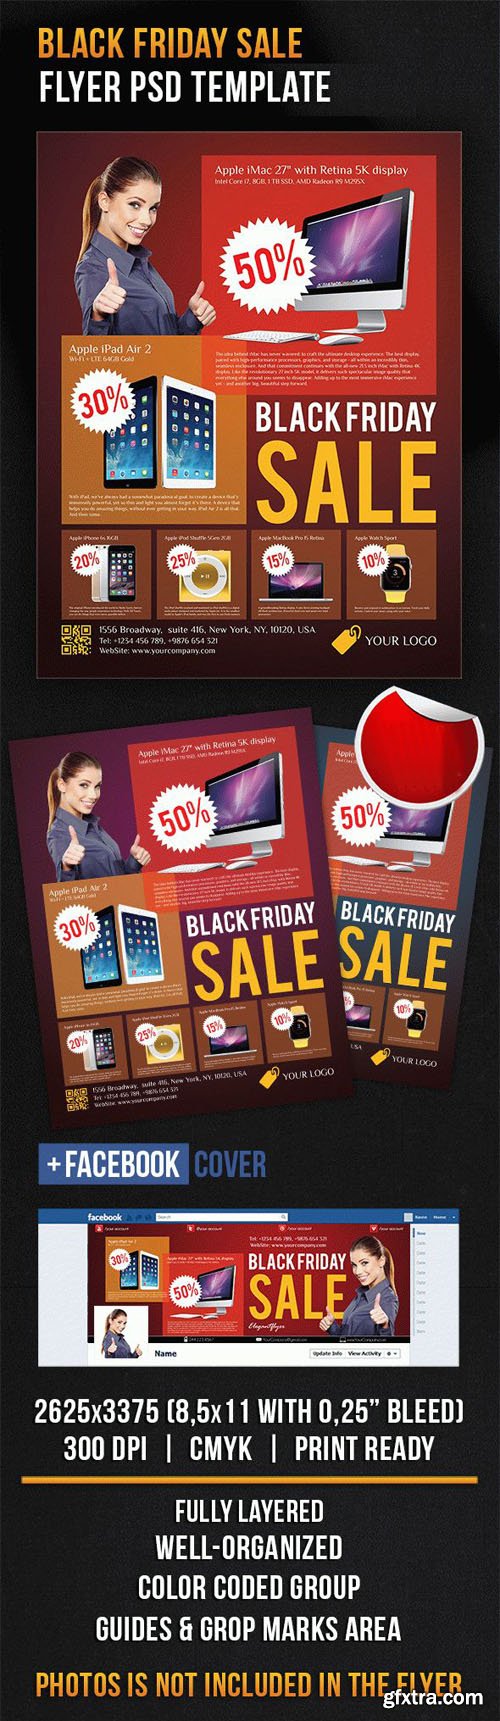 Black Friday Sale Flyer PSD Template + Facebook Cover PSD Template